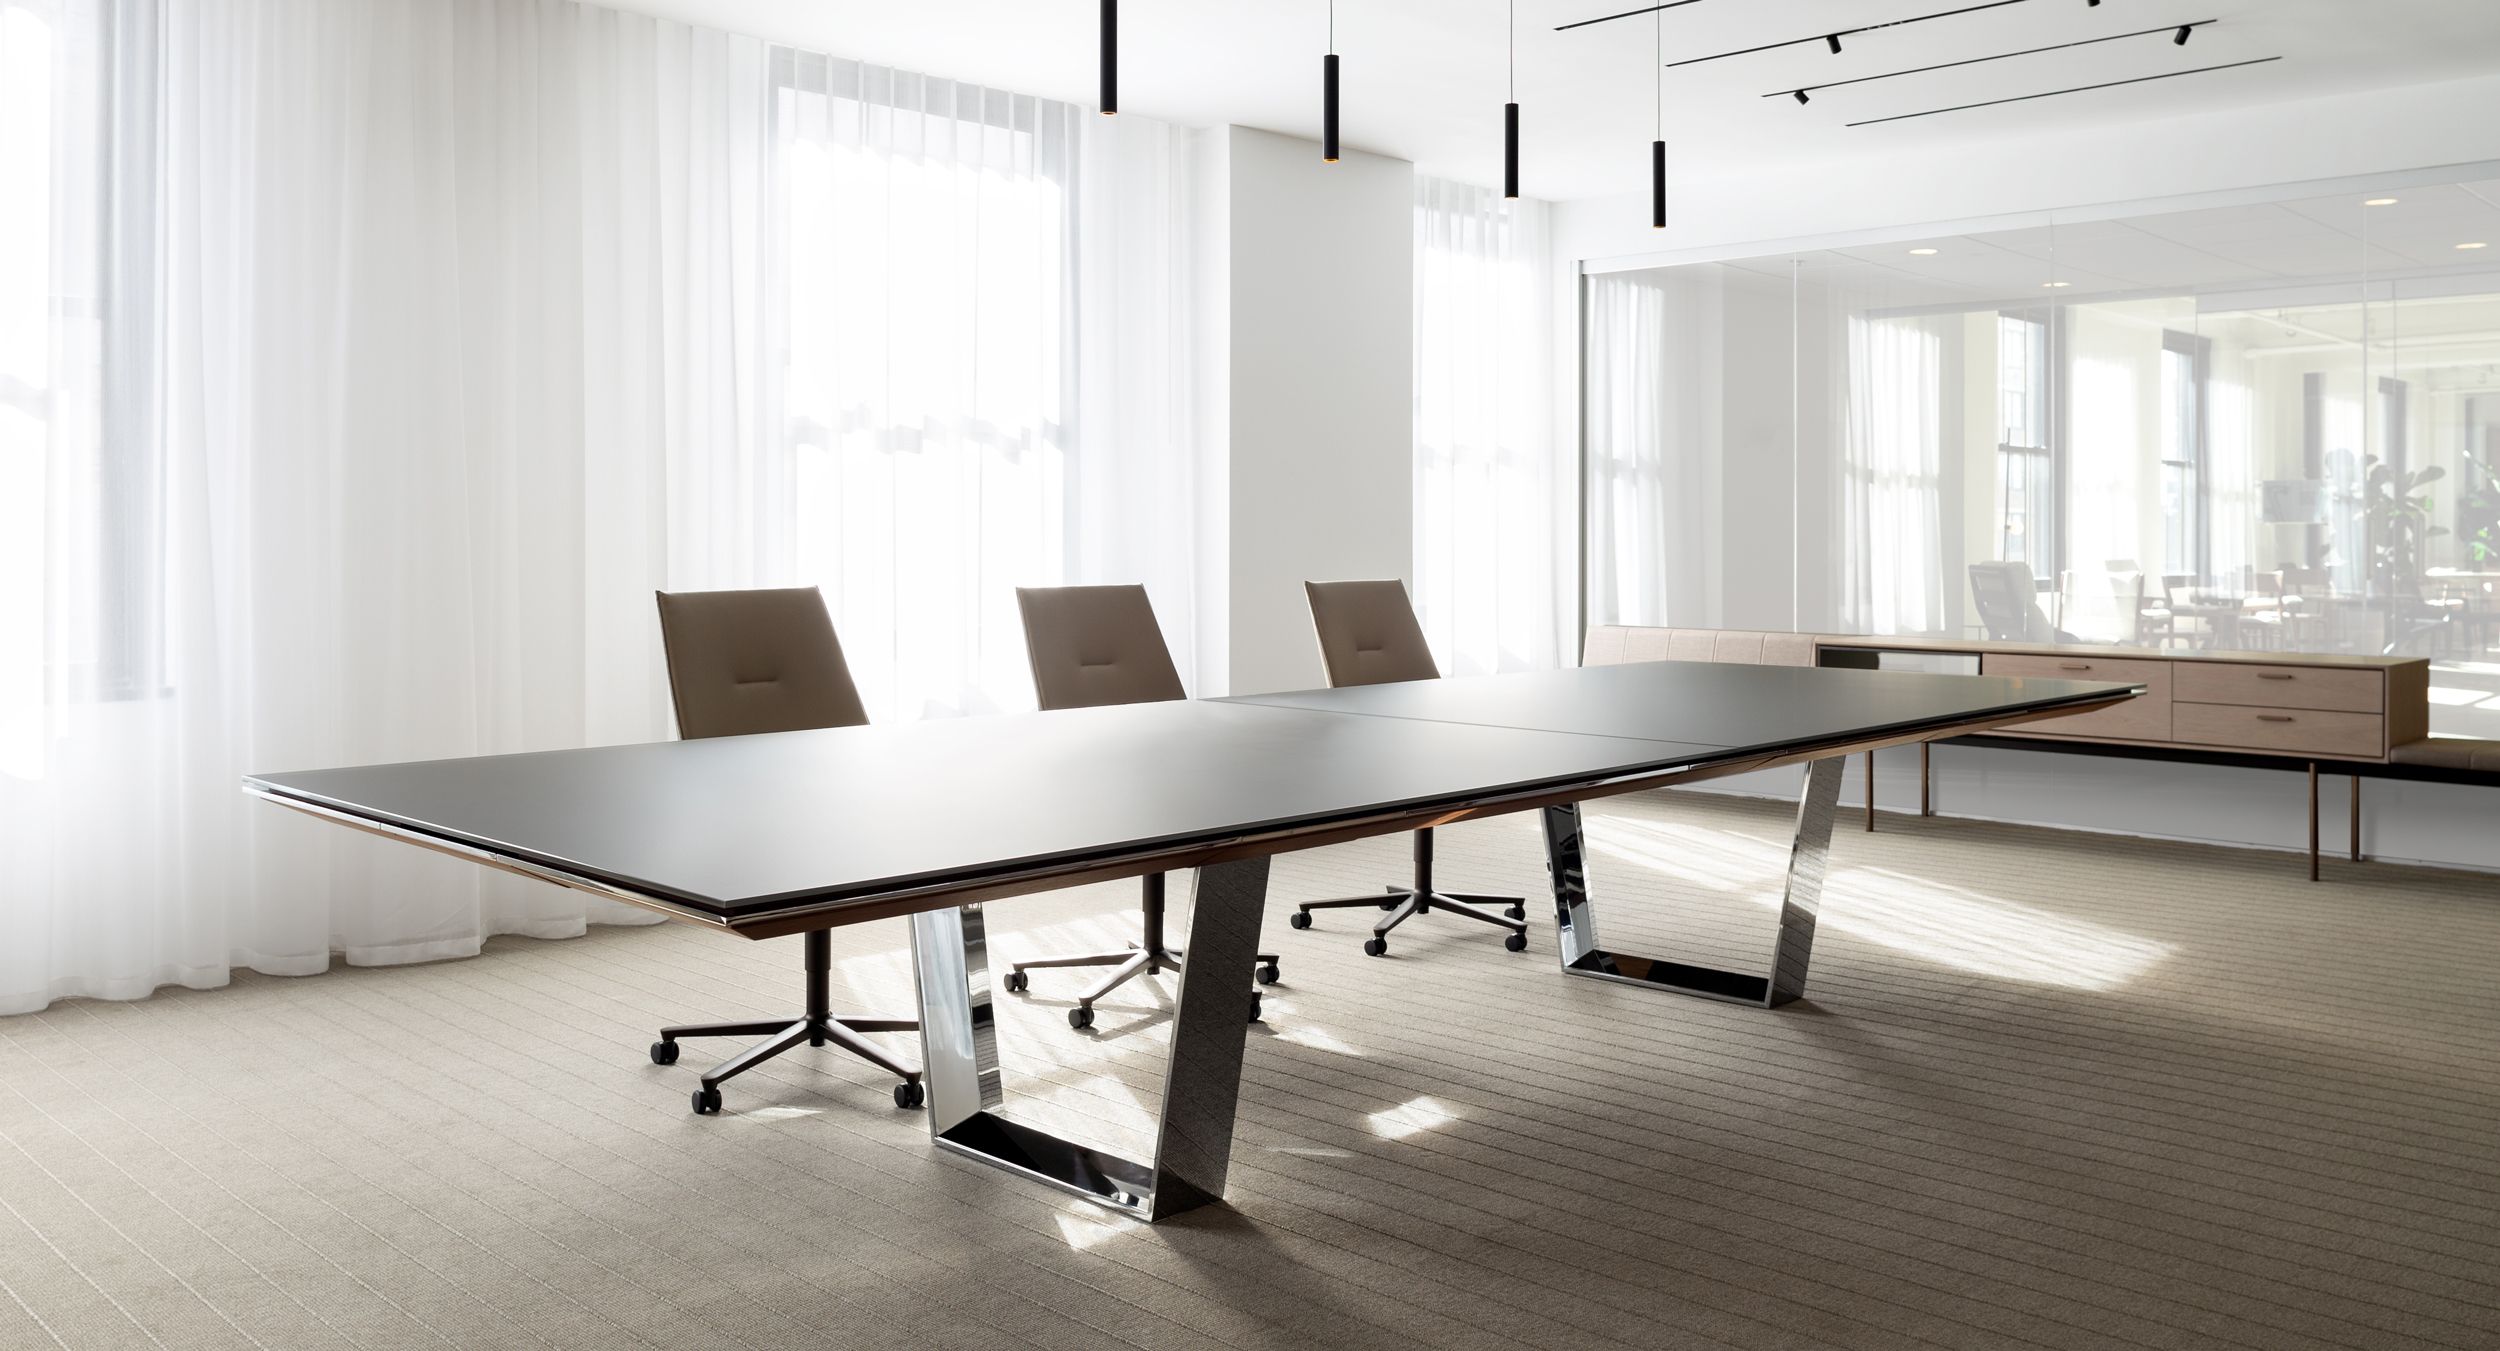 A MESA conference table with etched back-painted glass and polished chrome is the centerpiece of this airy conference room.